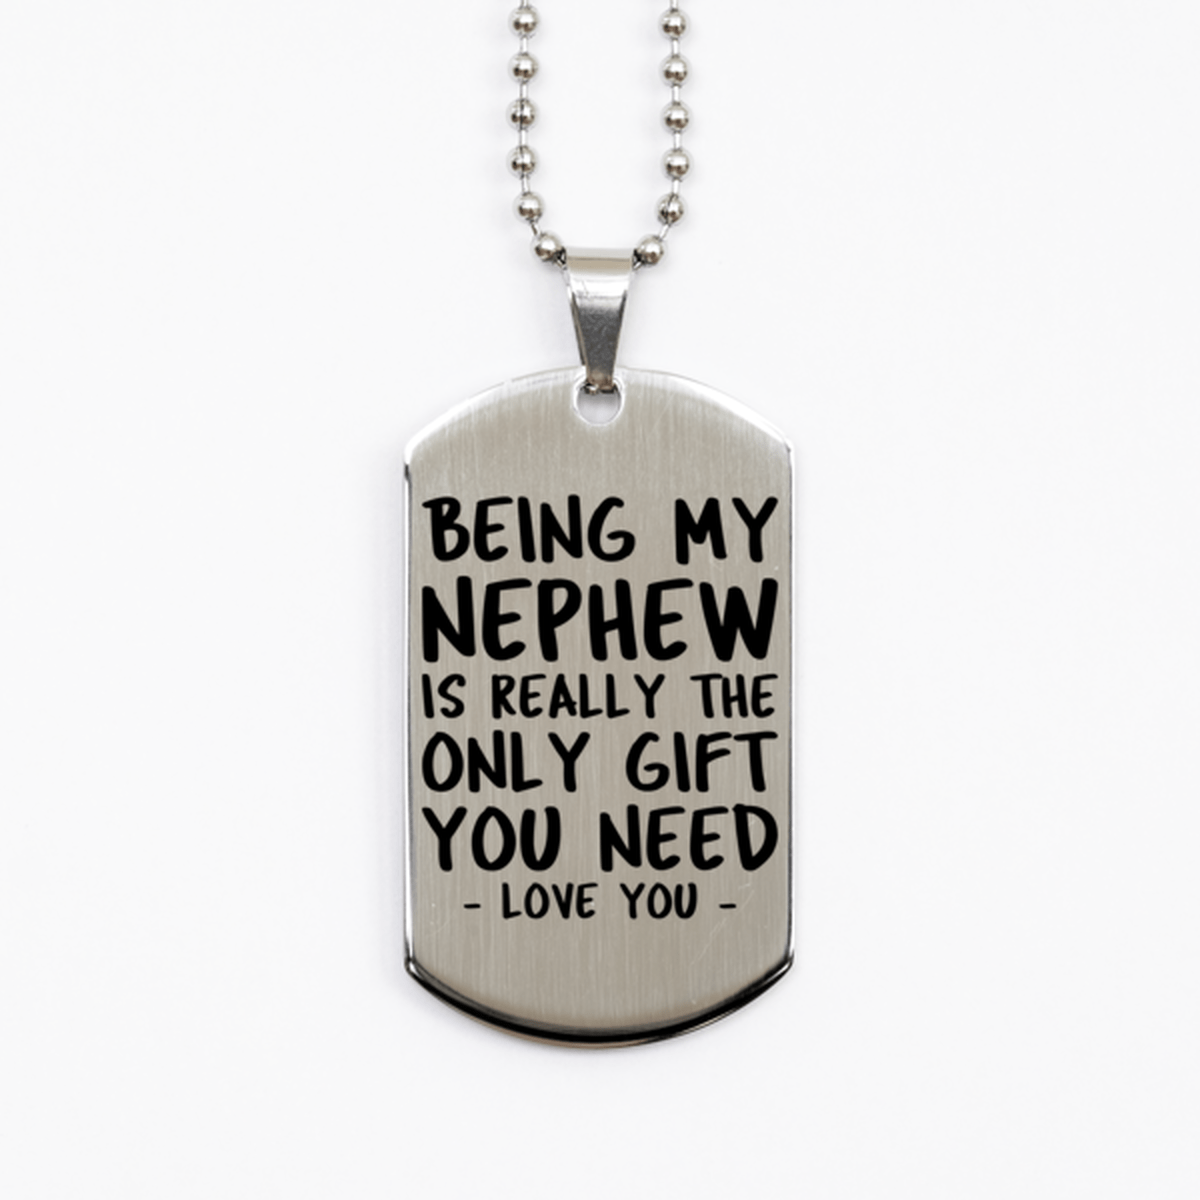 Funny Nephew Silver Dog Tag Necklace, Being My Nephew Is Really the Only Gift You Need, Best Birthday Gifts for Nephew